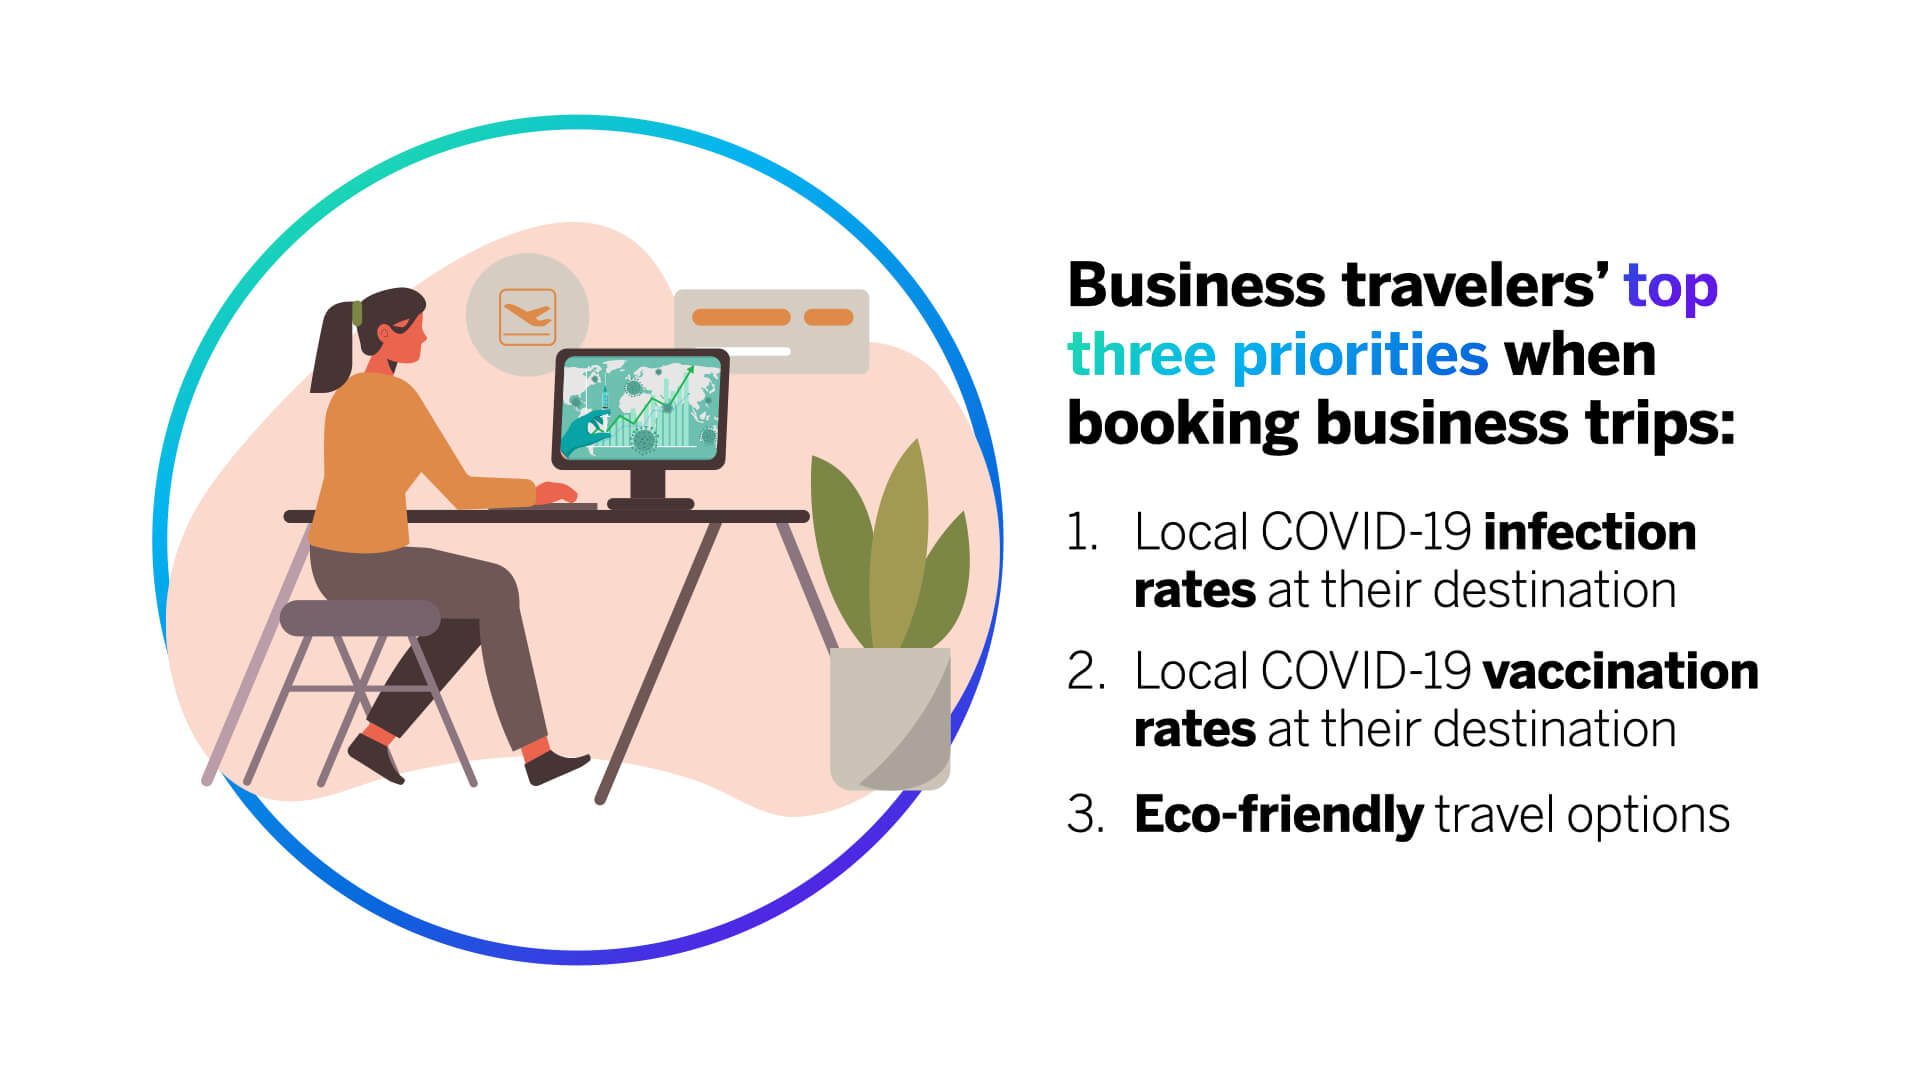 Business traveler's top 3 priorities when booking business trips